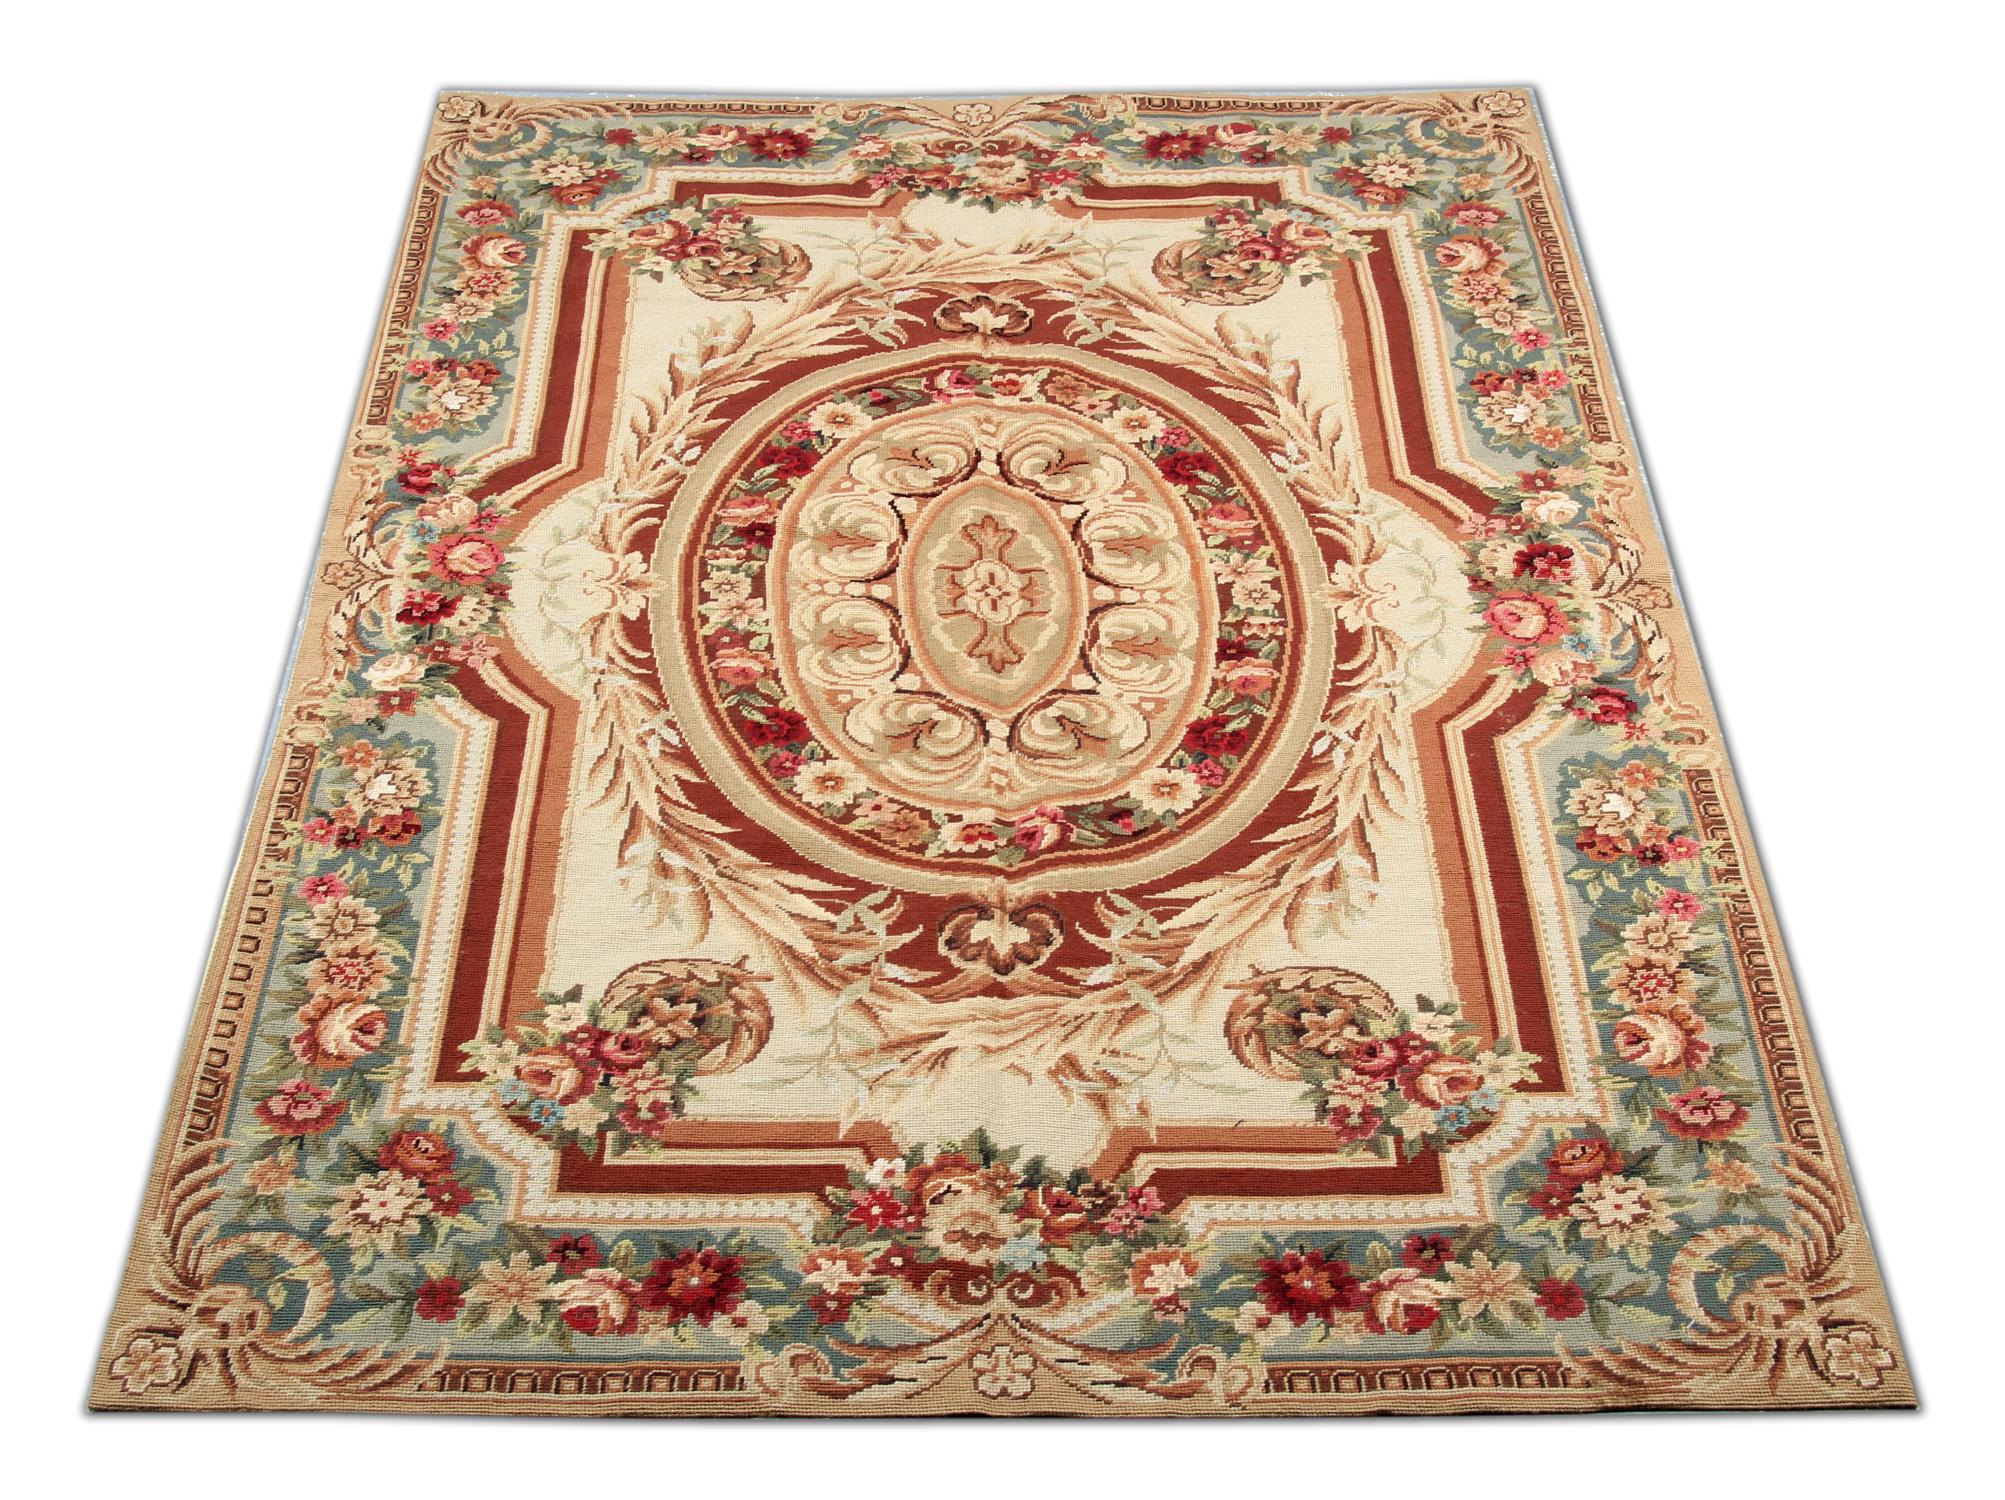 This highly-decorative Aubusson rug features a beautifully woven floral design in green, deep red, beige, and brown colors. The border that encloses the central design features a green background and a decorative floral repeat pattern. Both the